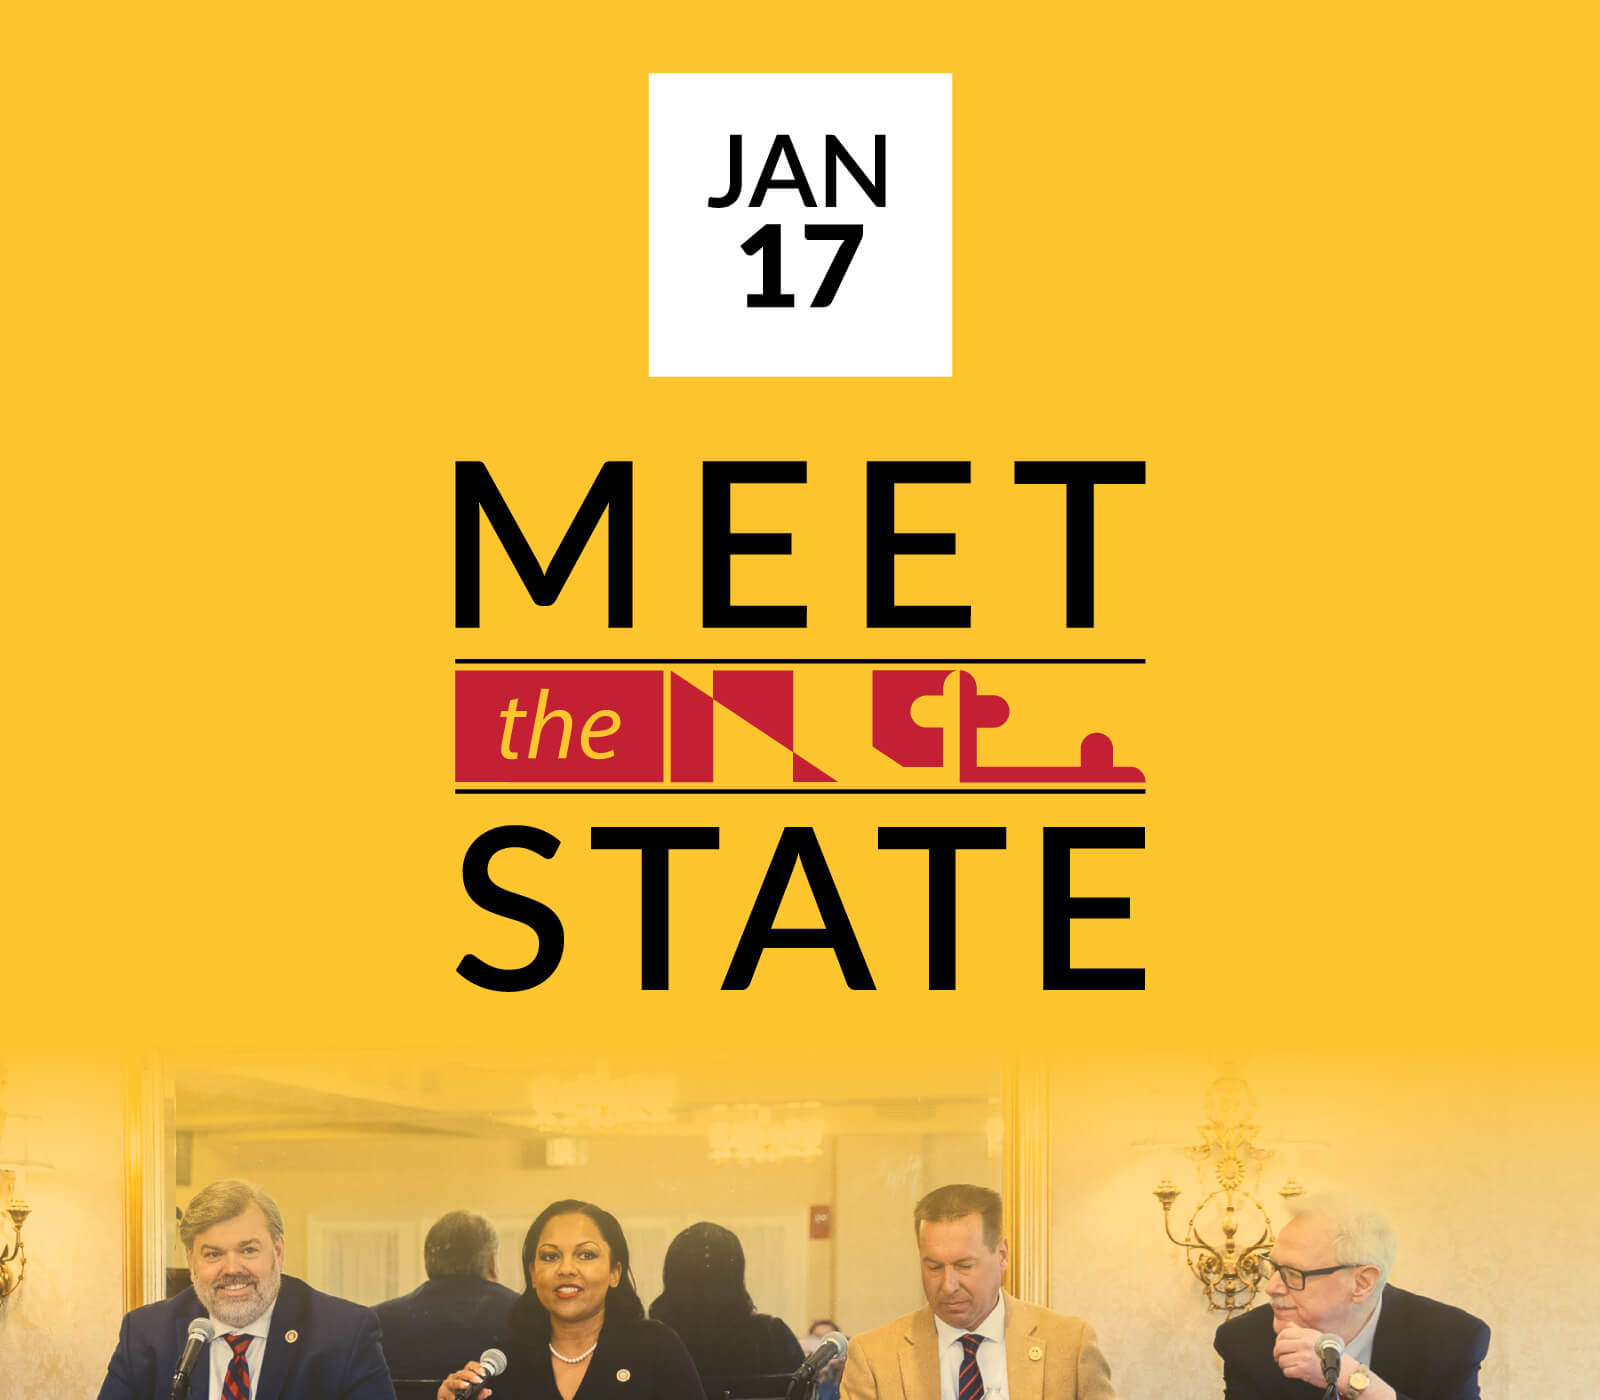 A yellow color overlaying a photo showing four individuals sitting on a stage with microphones as they present as part of a panel discussion. The text Jan 17 and a logo with text saying Meet the State are shown as well.